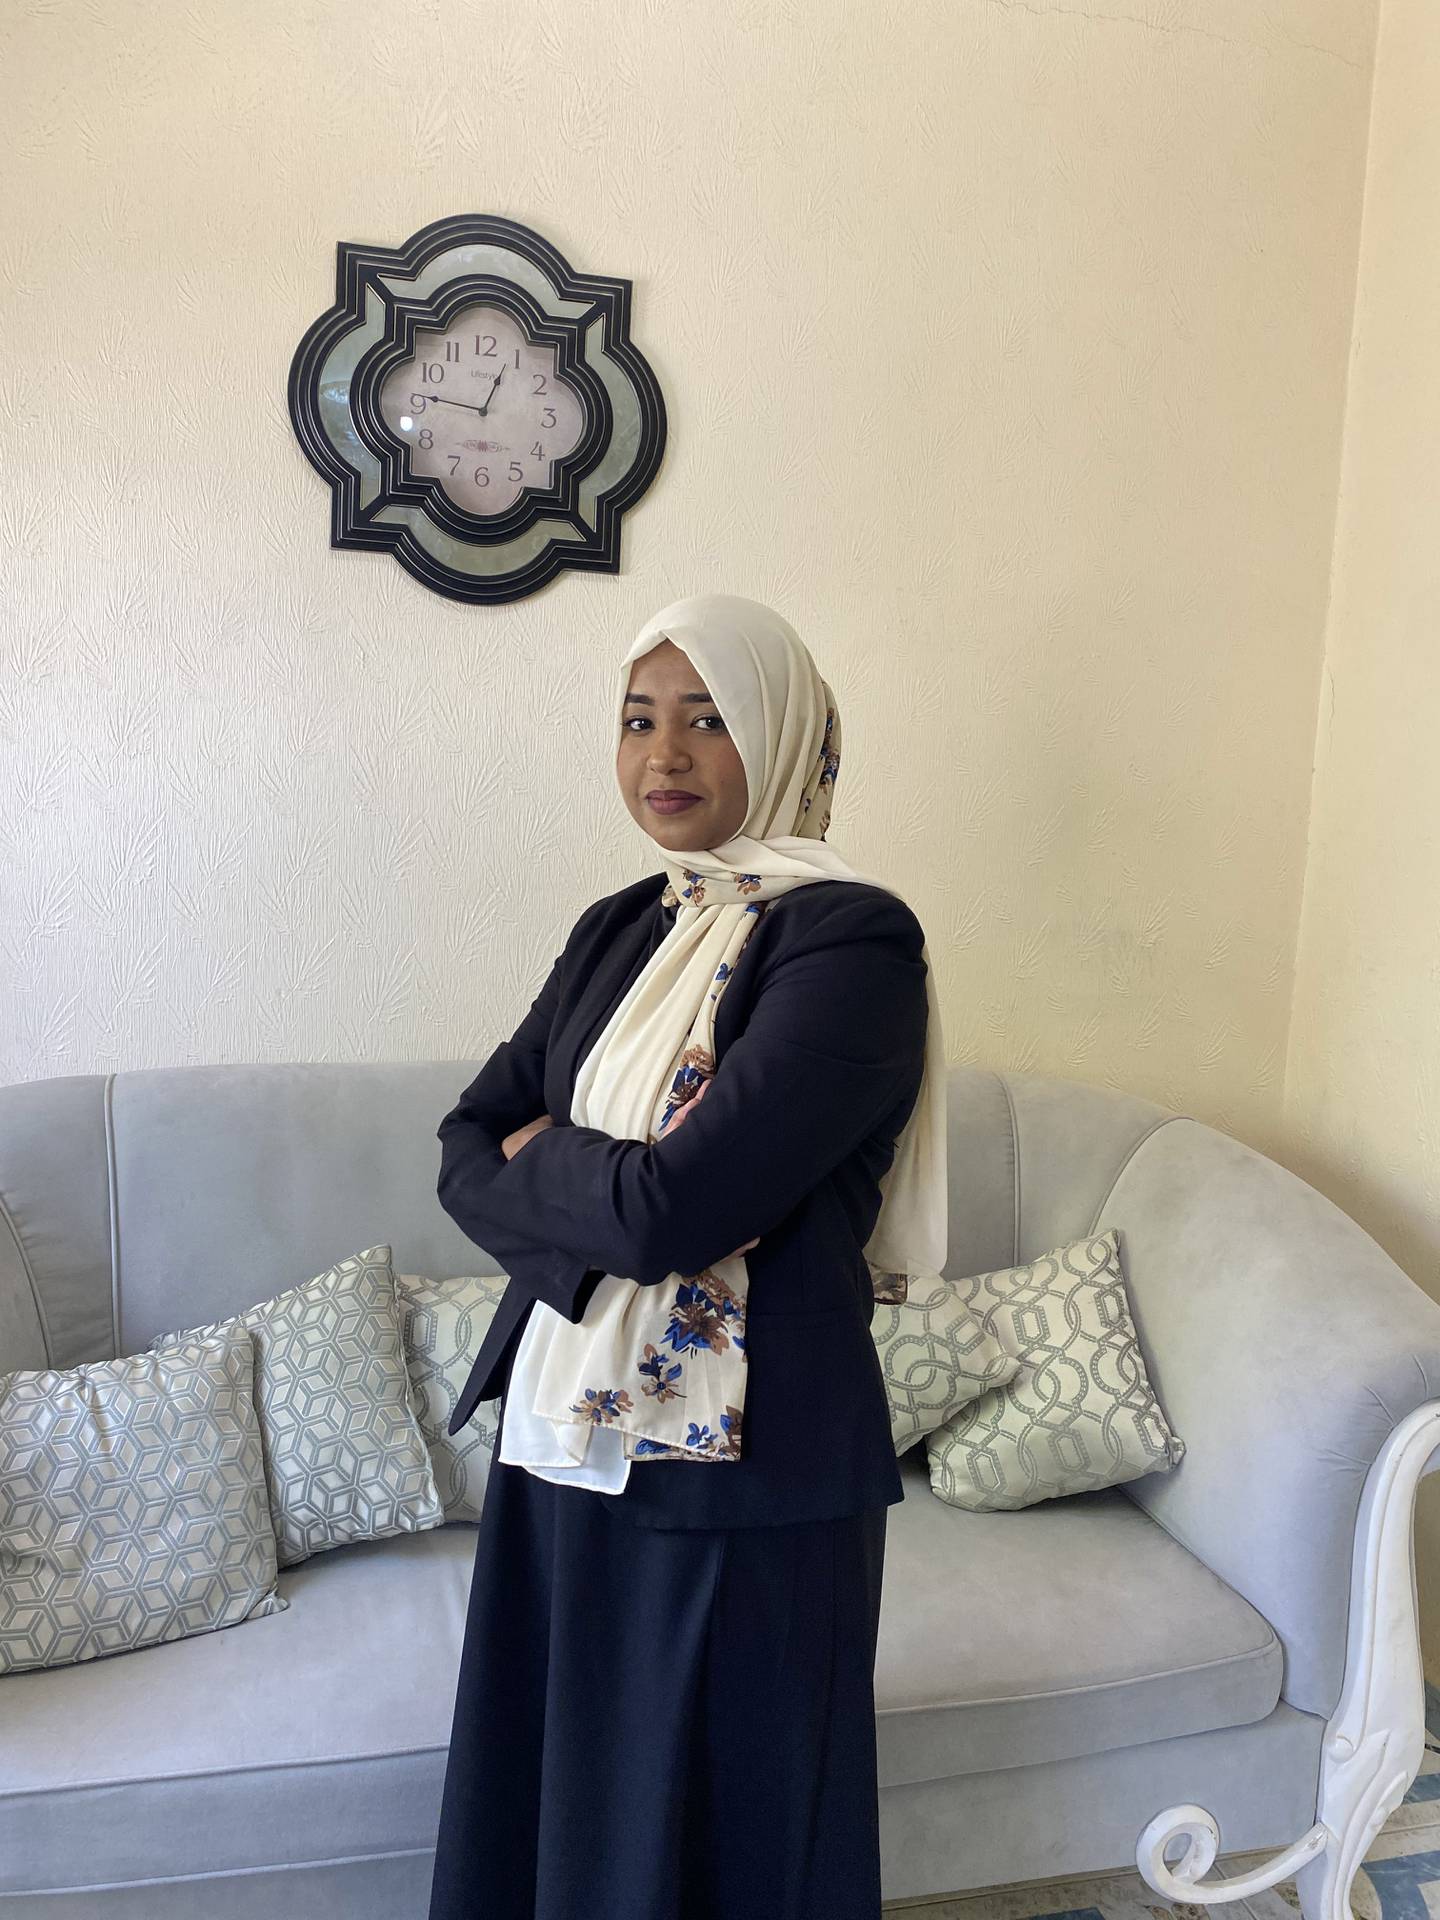 Suha Graal, 36, a Sudanese entrepreneur and academic researcher living in Al Ain, was awarded the UAE golden visa after nominating herself.Photo: Suha Graal